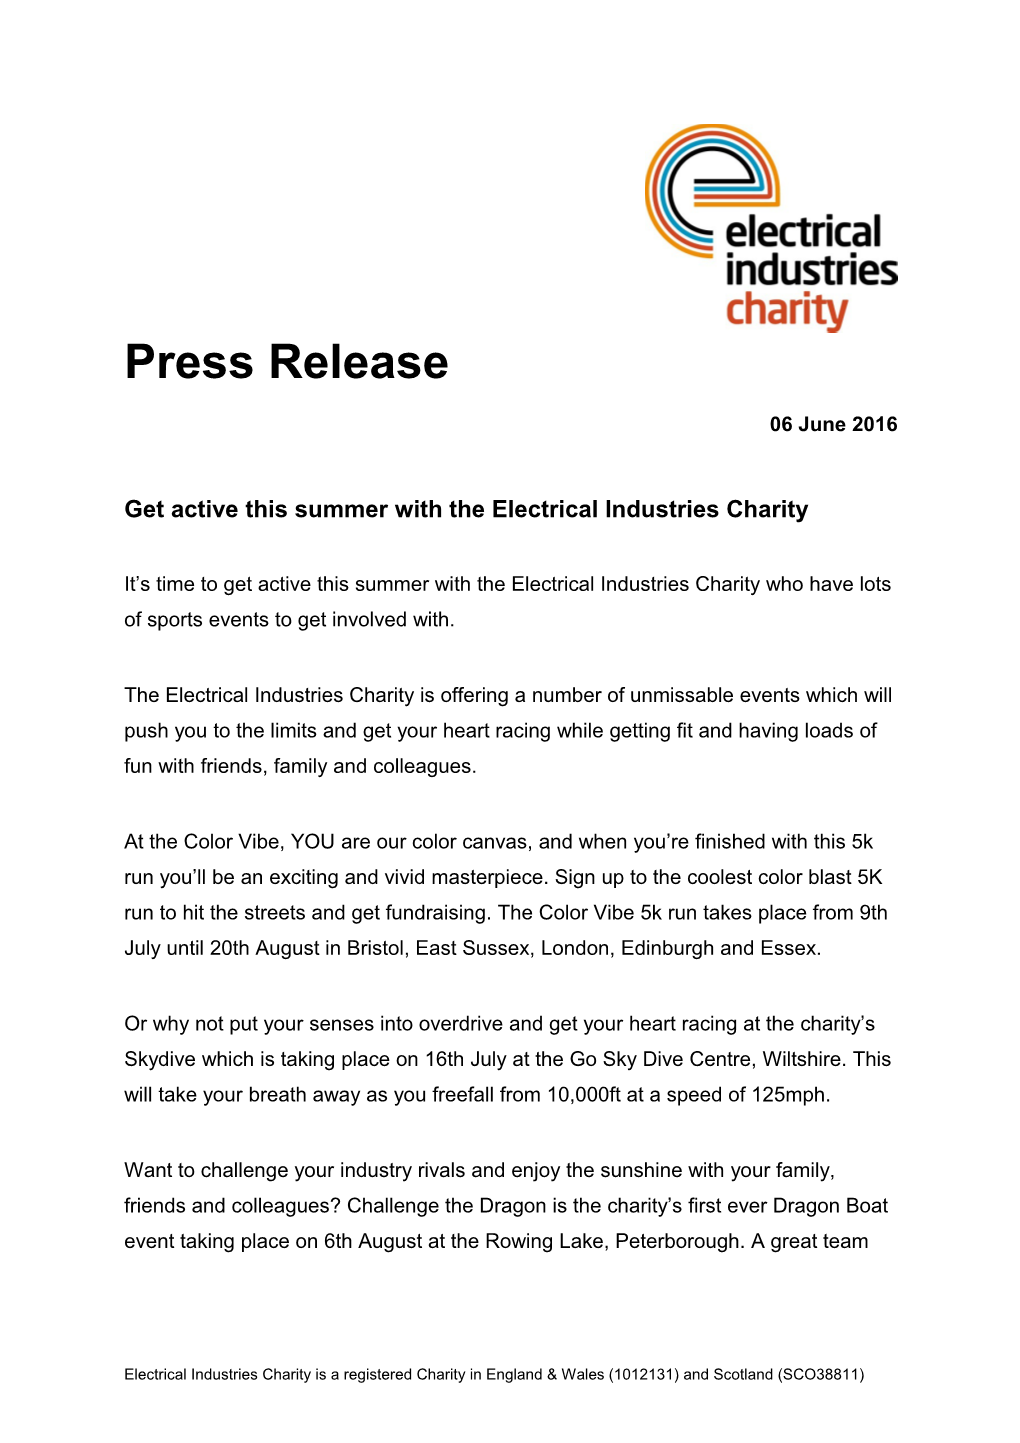 Get Active This Summer with the Electrical Industries Charity